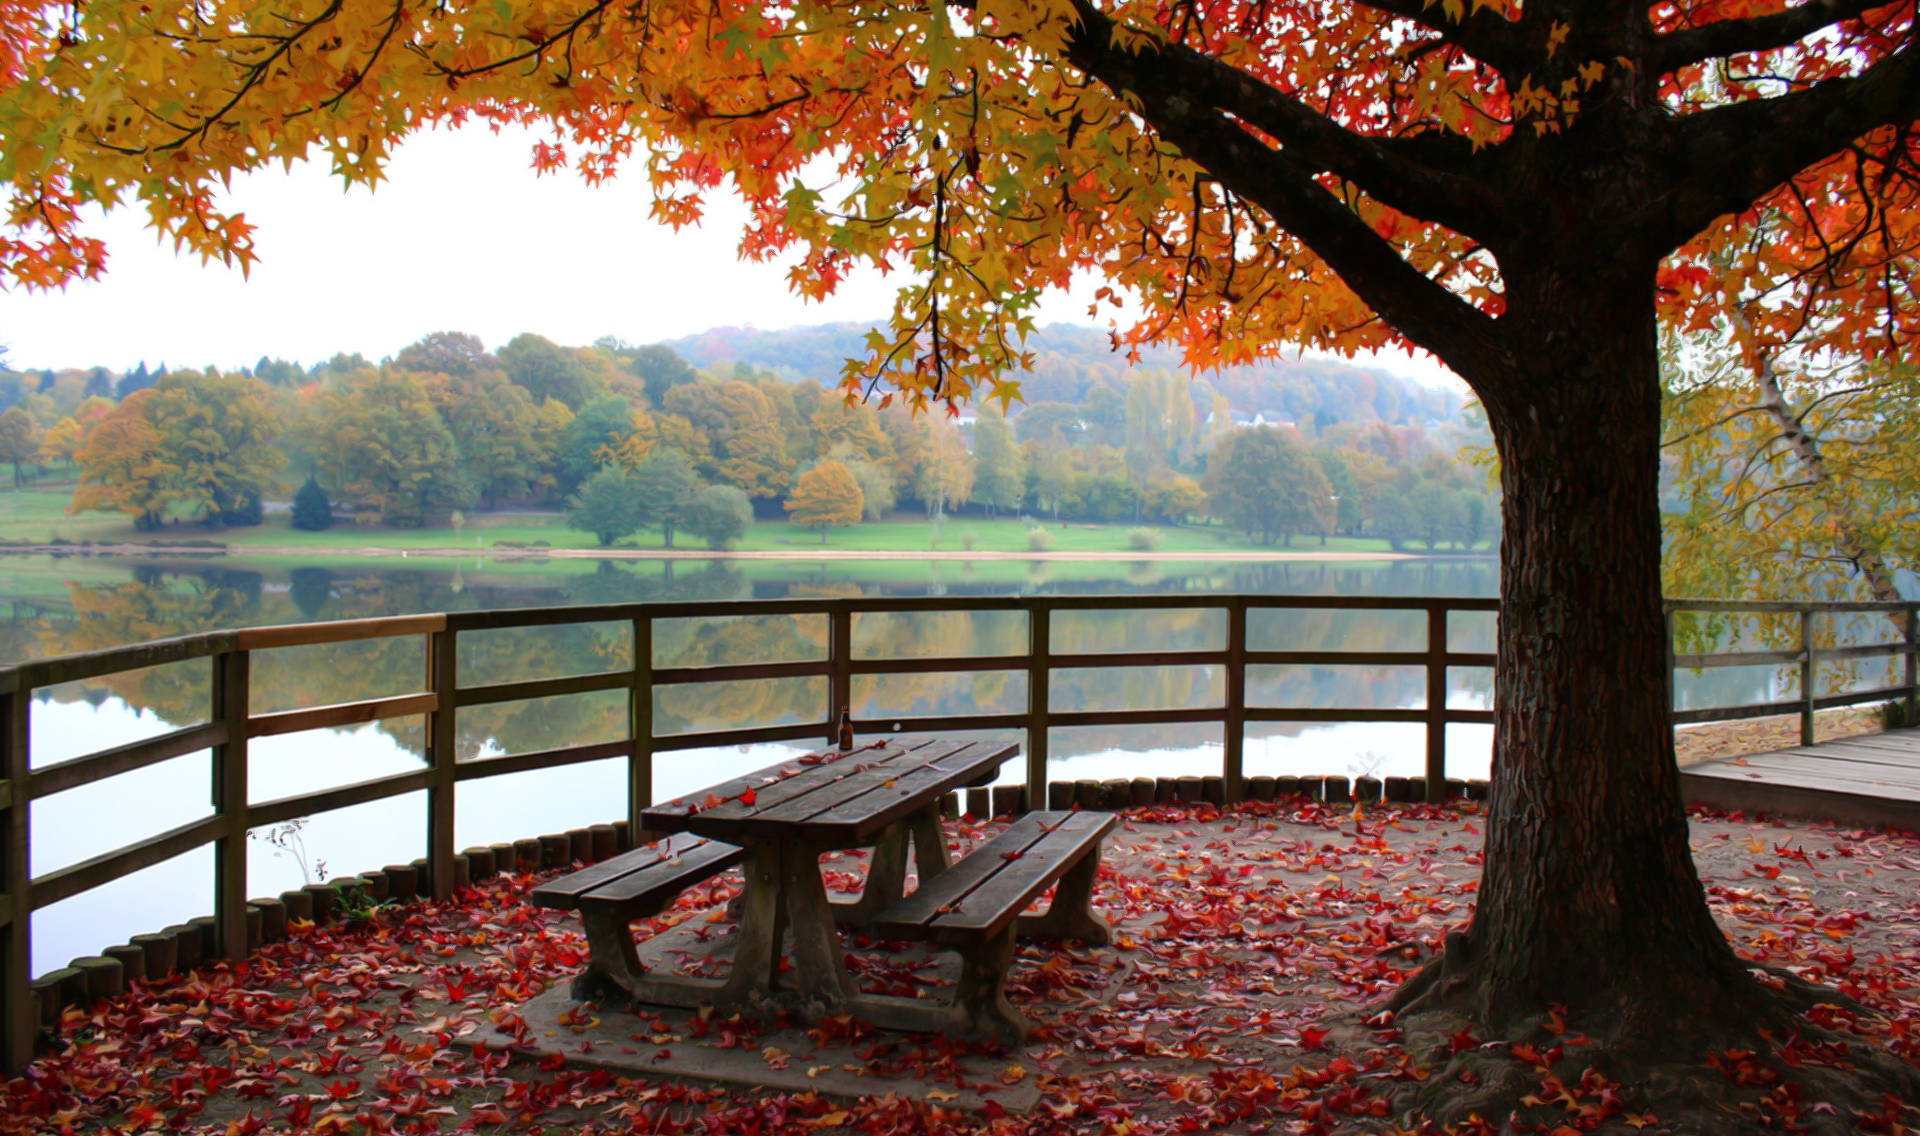 EXT. AUTUMN BENCH – DAY